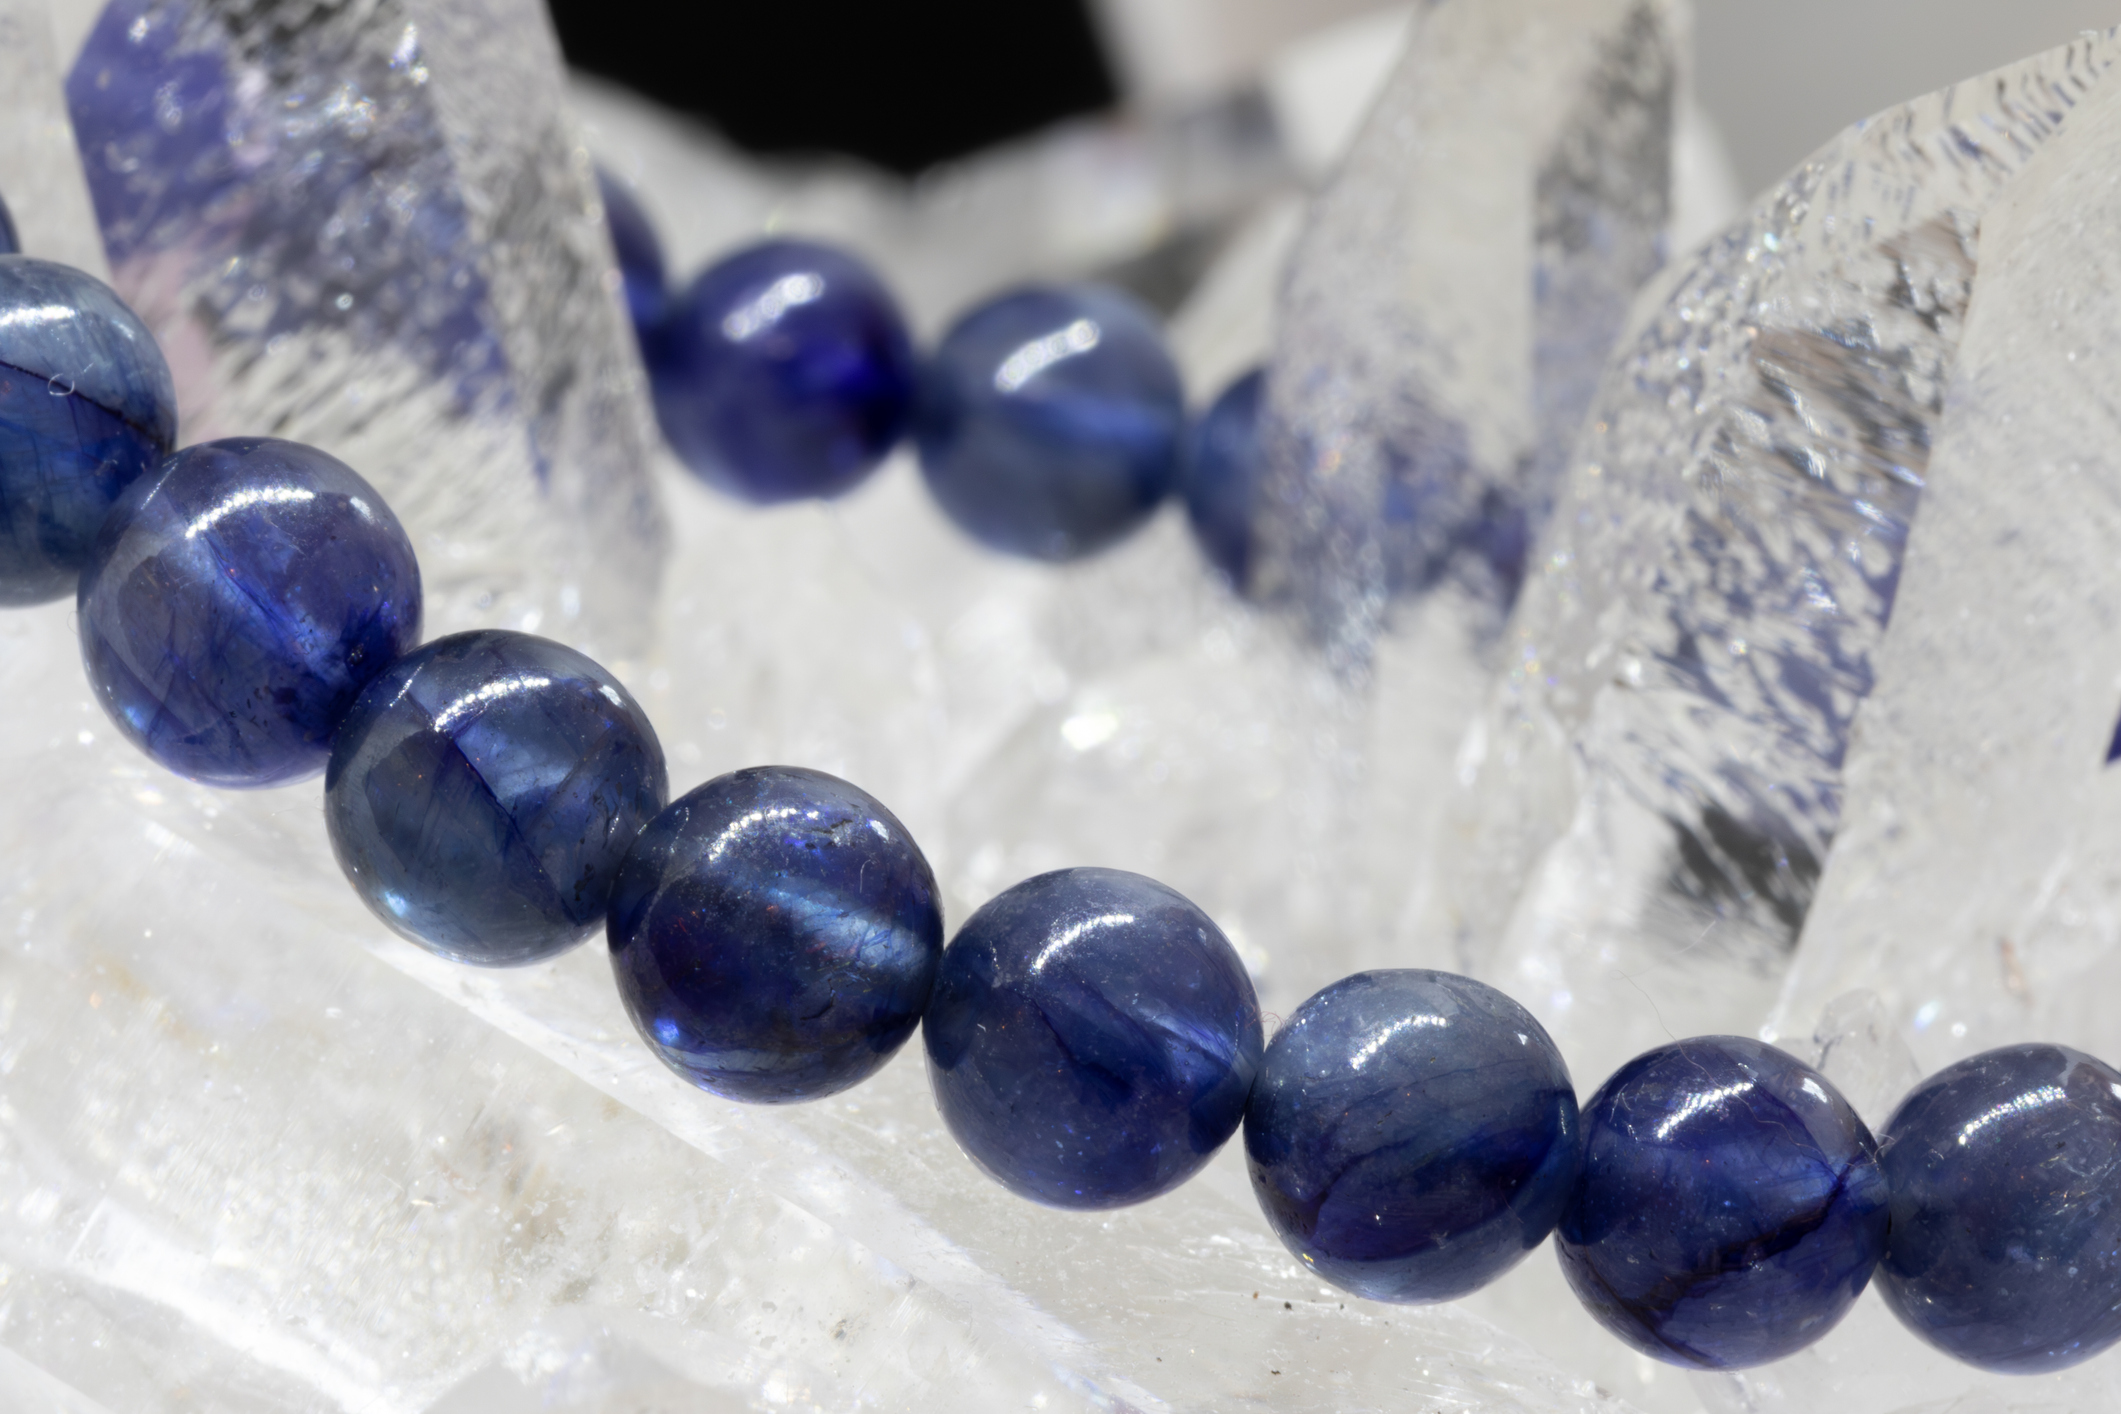 <p>  There are also a number of gemstones and crystals believed to symbolize friendship. One of the most common is lapis lazuli, which can indicate truth and companship. Other options we love that are associated with friendship include: </p> <ul>  <li>Yellow topaz  </li>  <li>Amethyst  </li>  <li>Rose quartz  </li>  <li>Moss agate  </li>  <li>   <a href="https://www.lovetoknow.com/life/style/moonstone-gem-facts" title="Moonstone's Symbolic Meaning & Spiritual Healing Uses ">Moonstone</a>  </li>  <li>Peridot  </li> </ul>